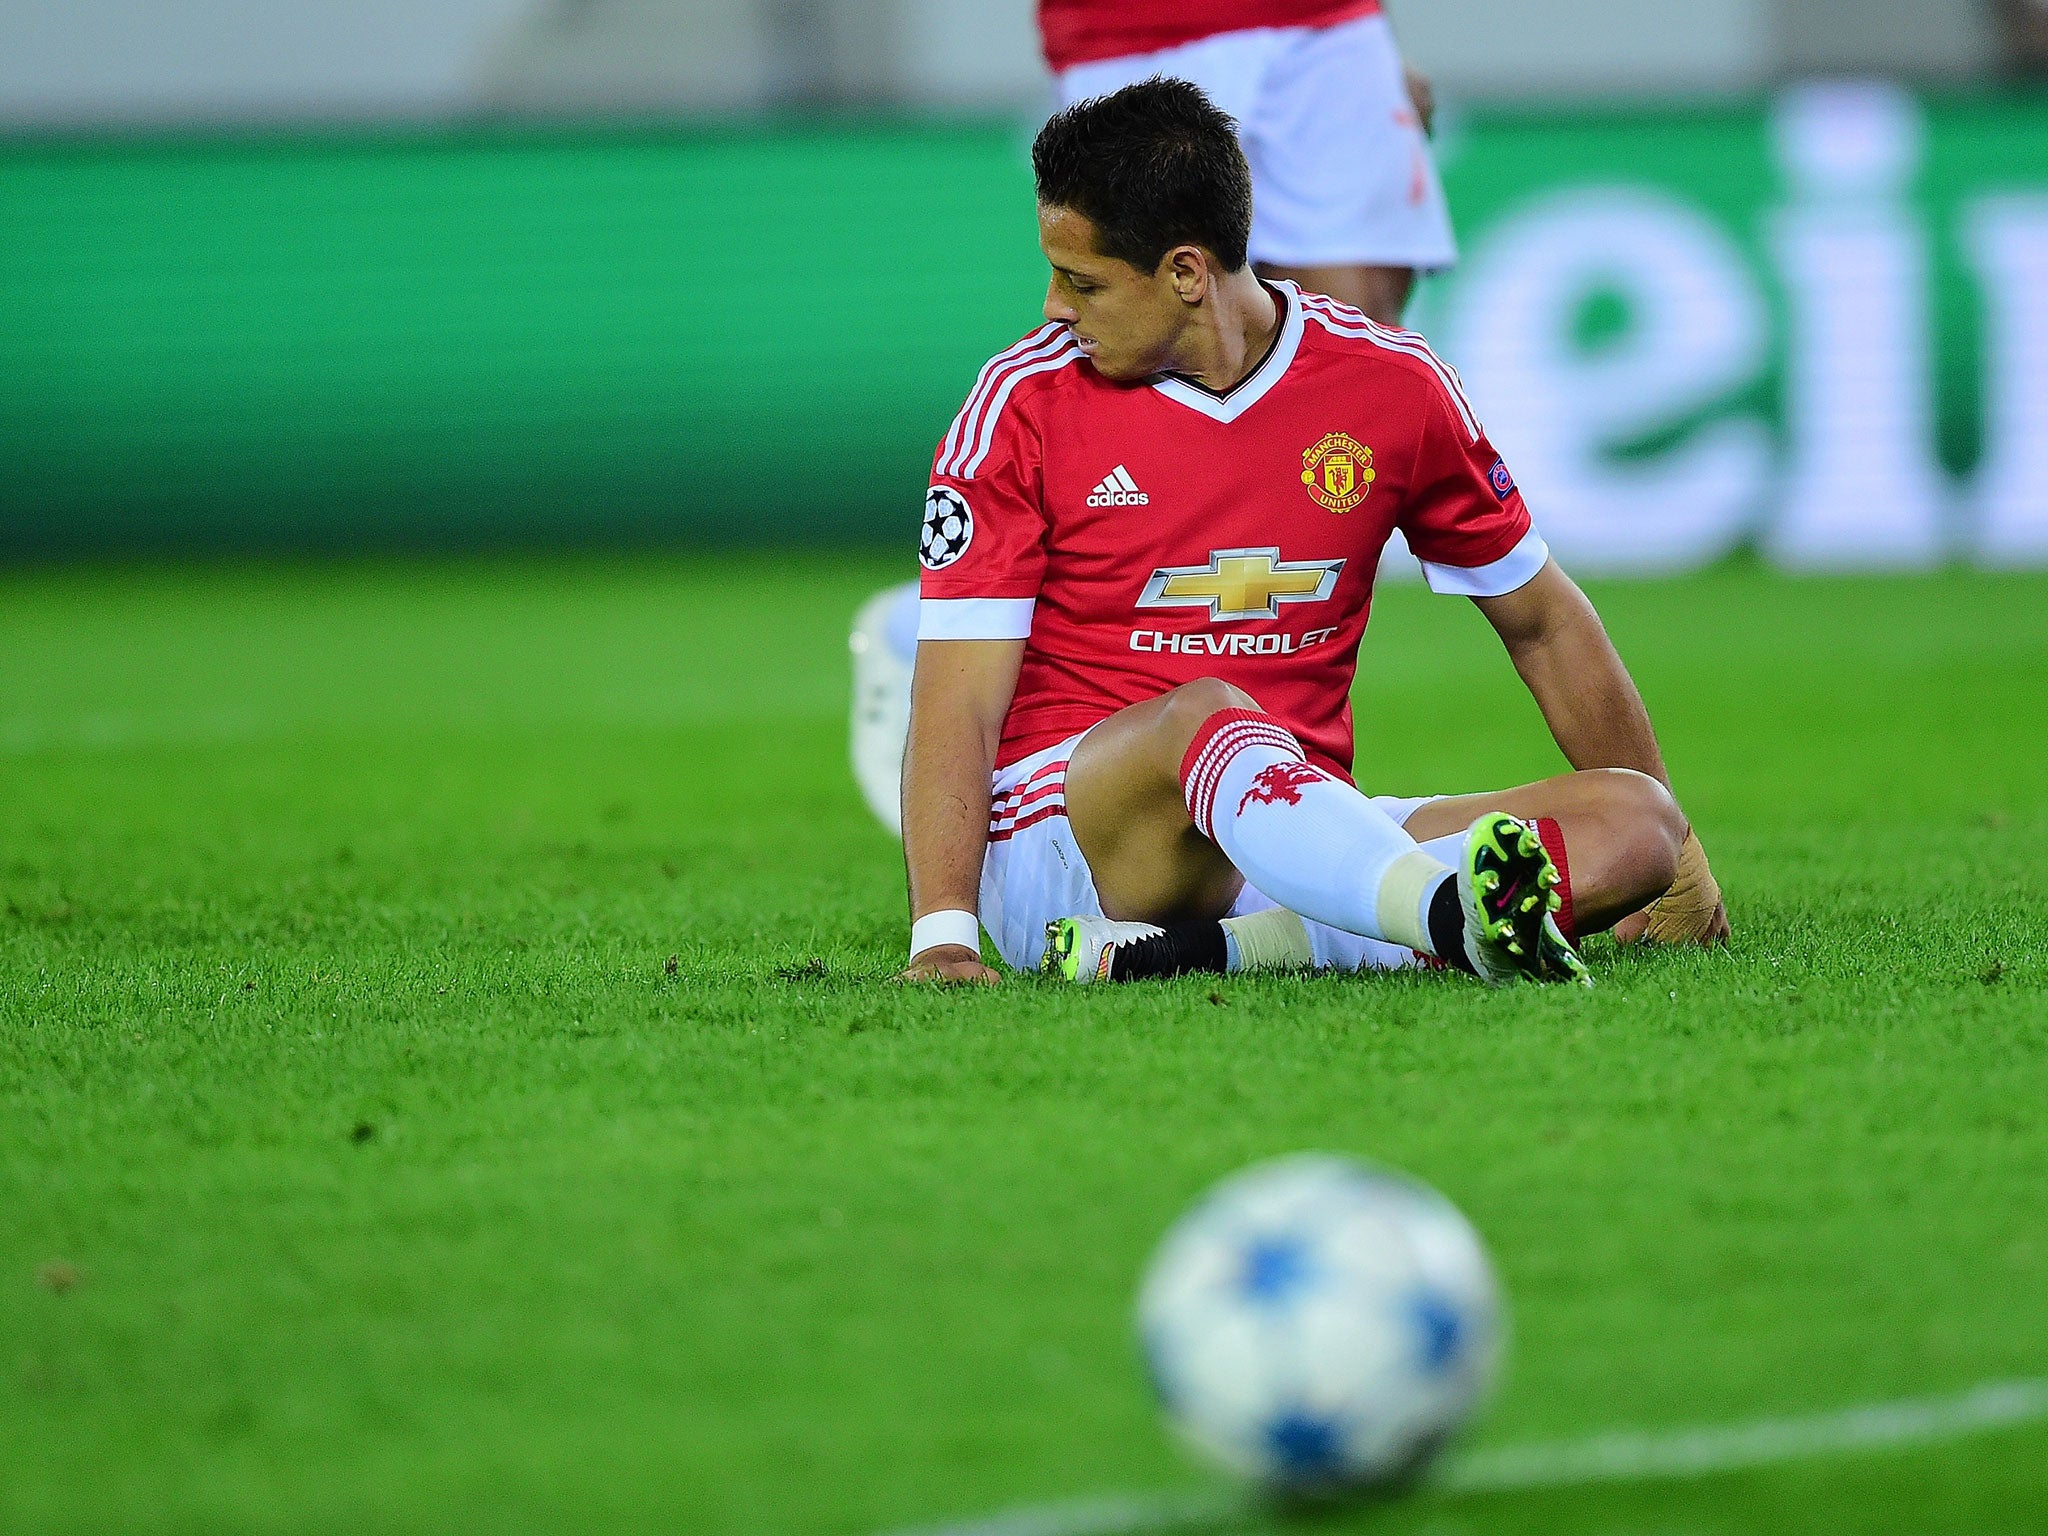 Javier Hernandez in action for Manchester United in their Champions League play-off against Club Brugge